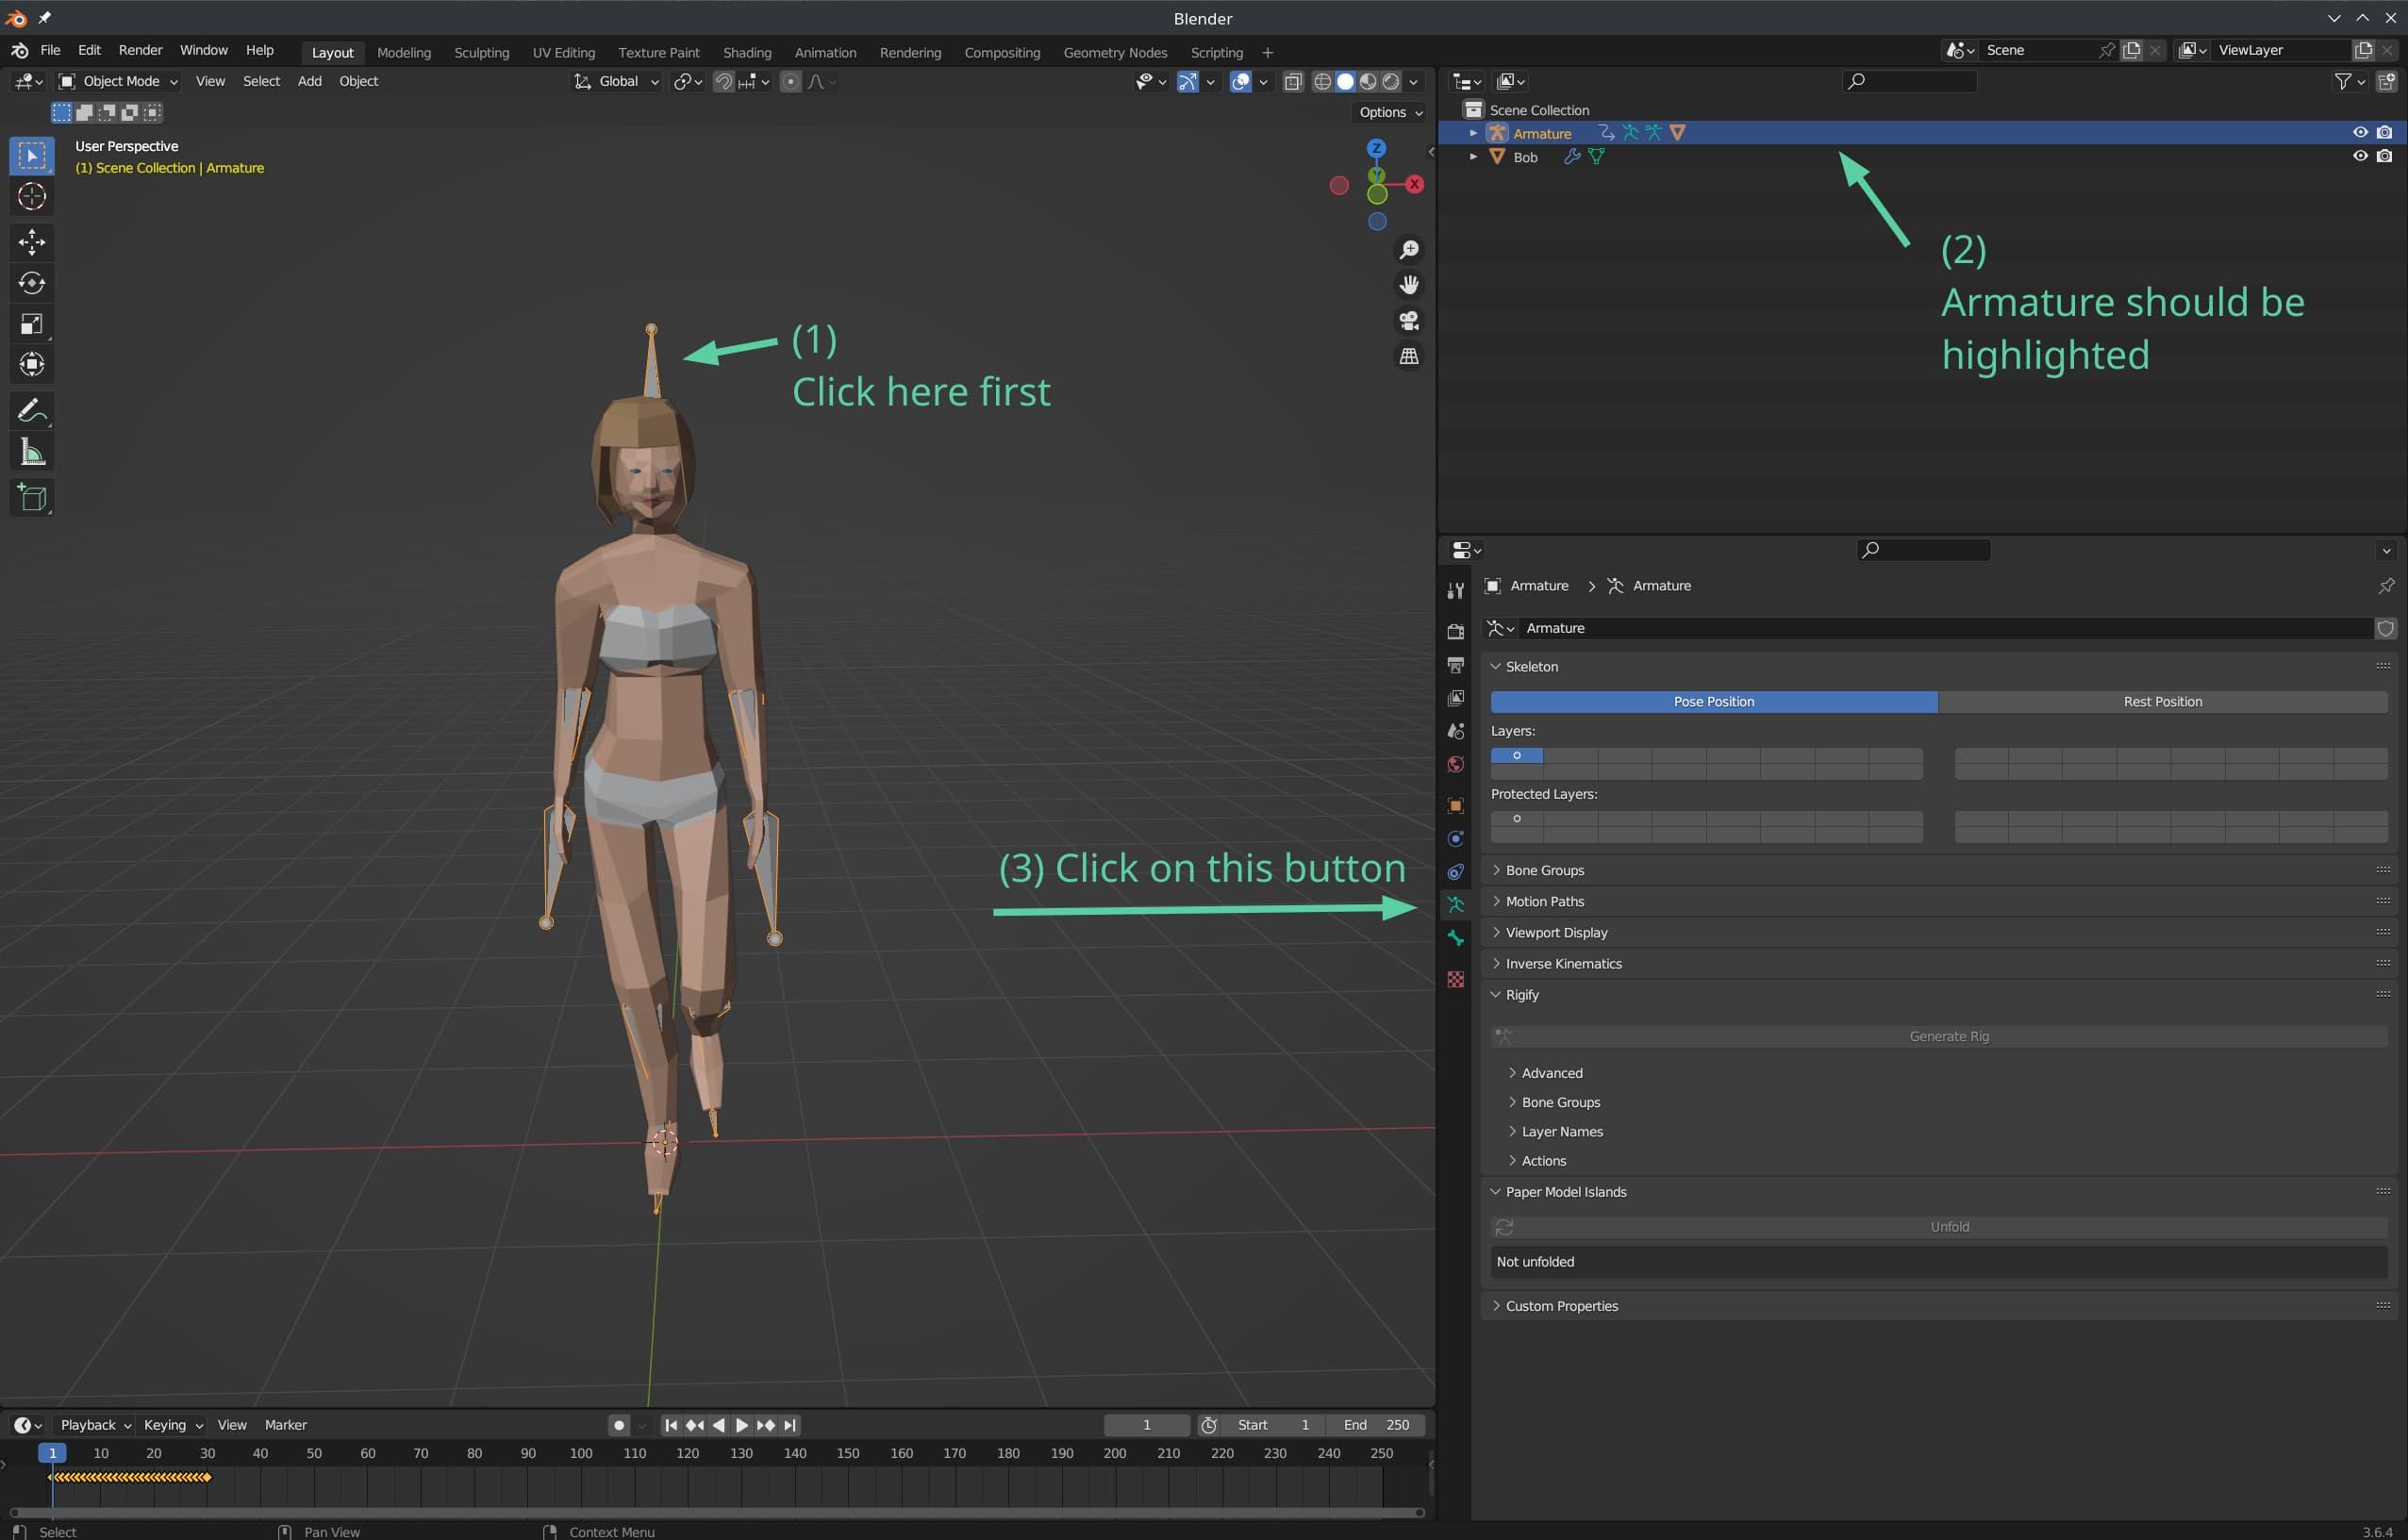 A Blender screenshot, showing the process of clicking on the bones of the armature, then seeing it highlighted, then clicking on a small green button that looks like a green stickman